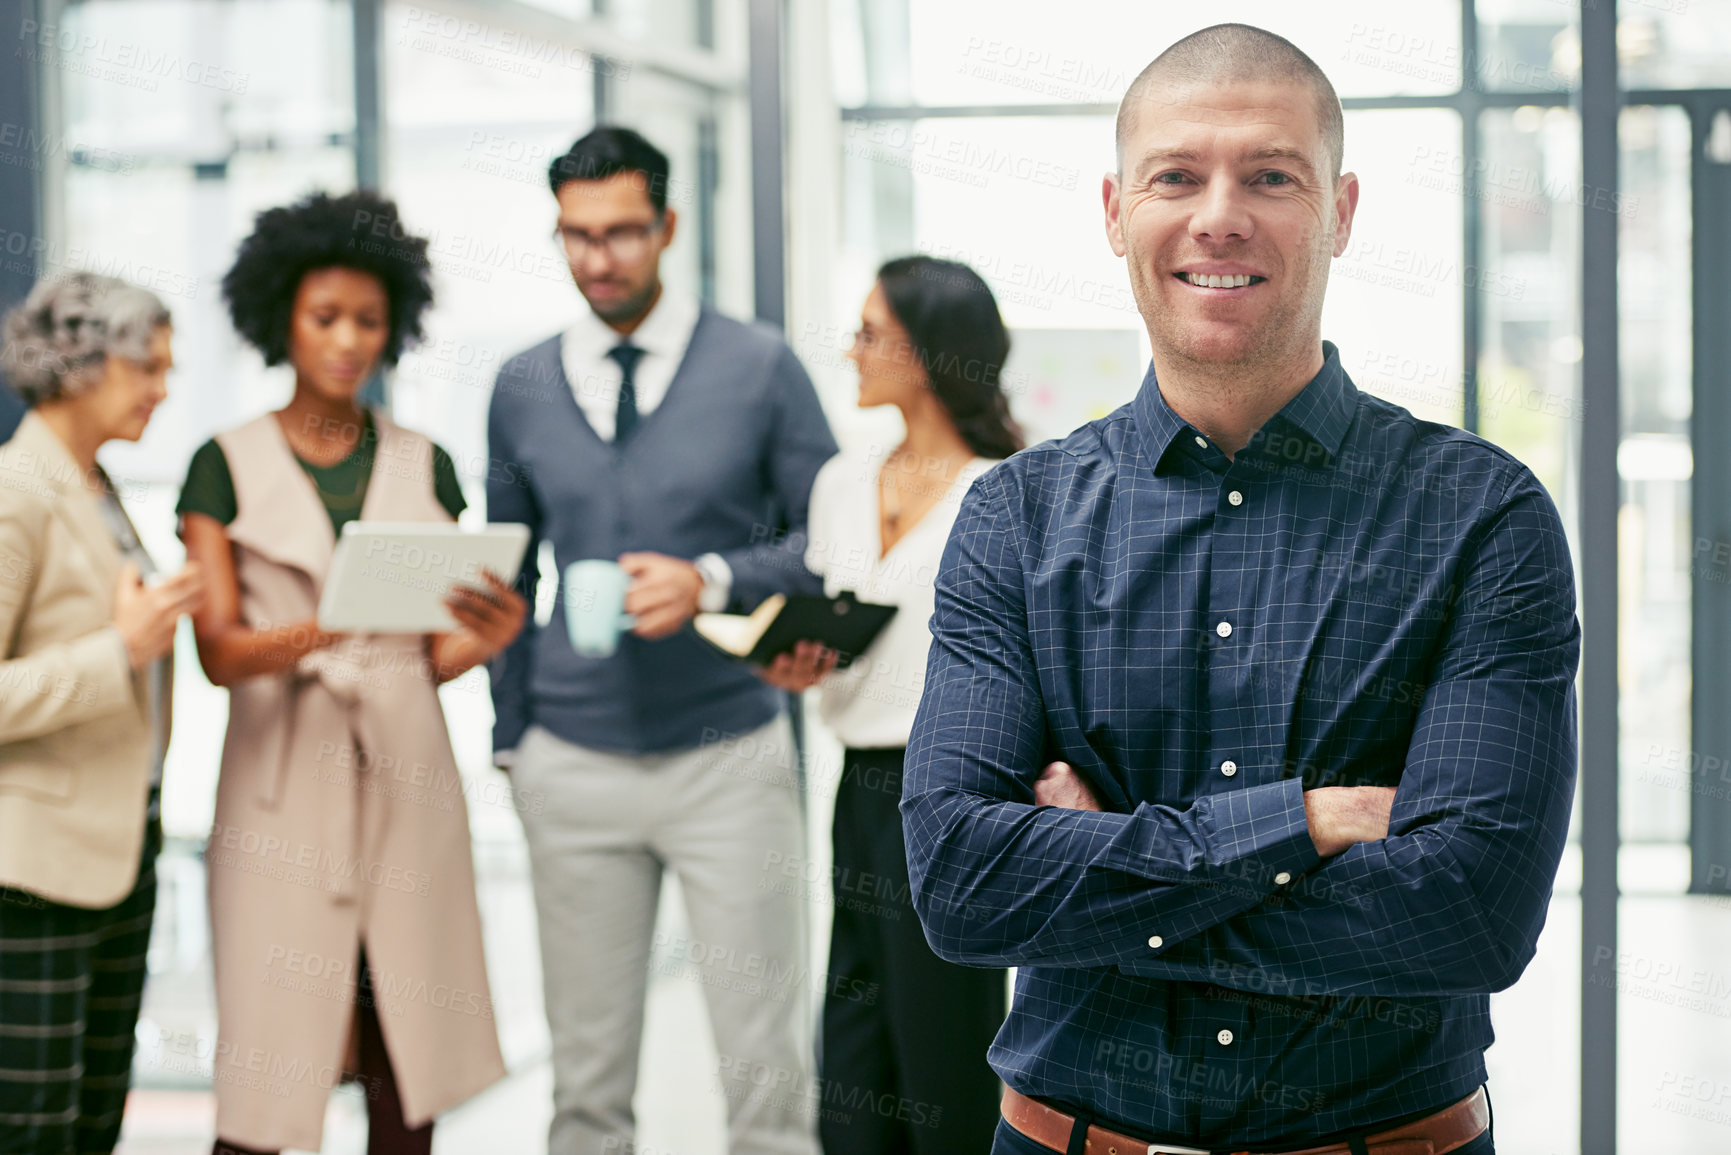 Buy stock photo Portrait of a businessman standing in an office with his colleagues in the background